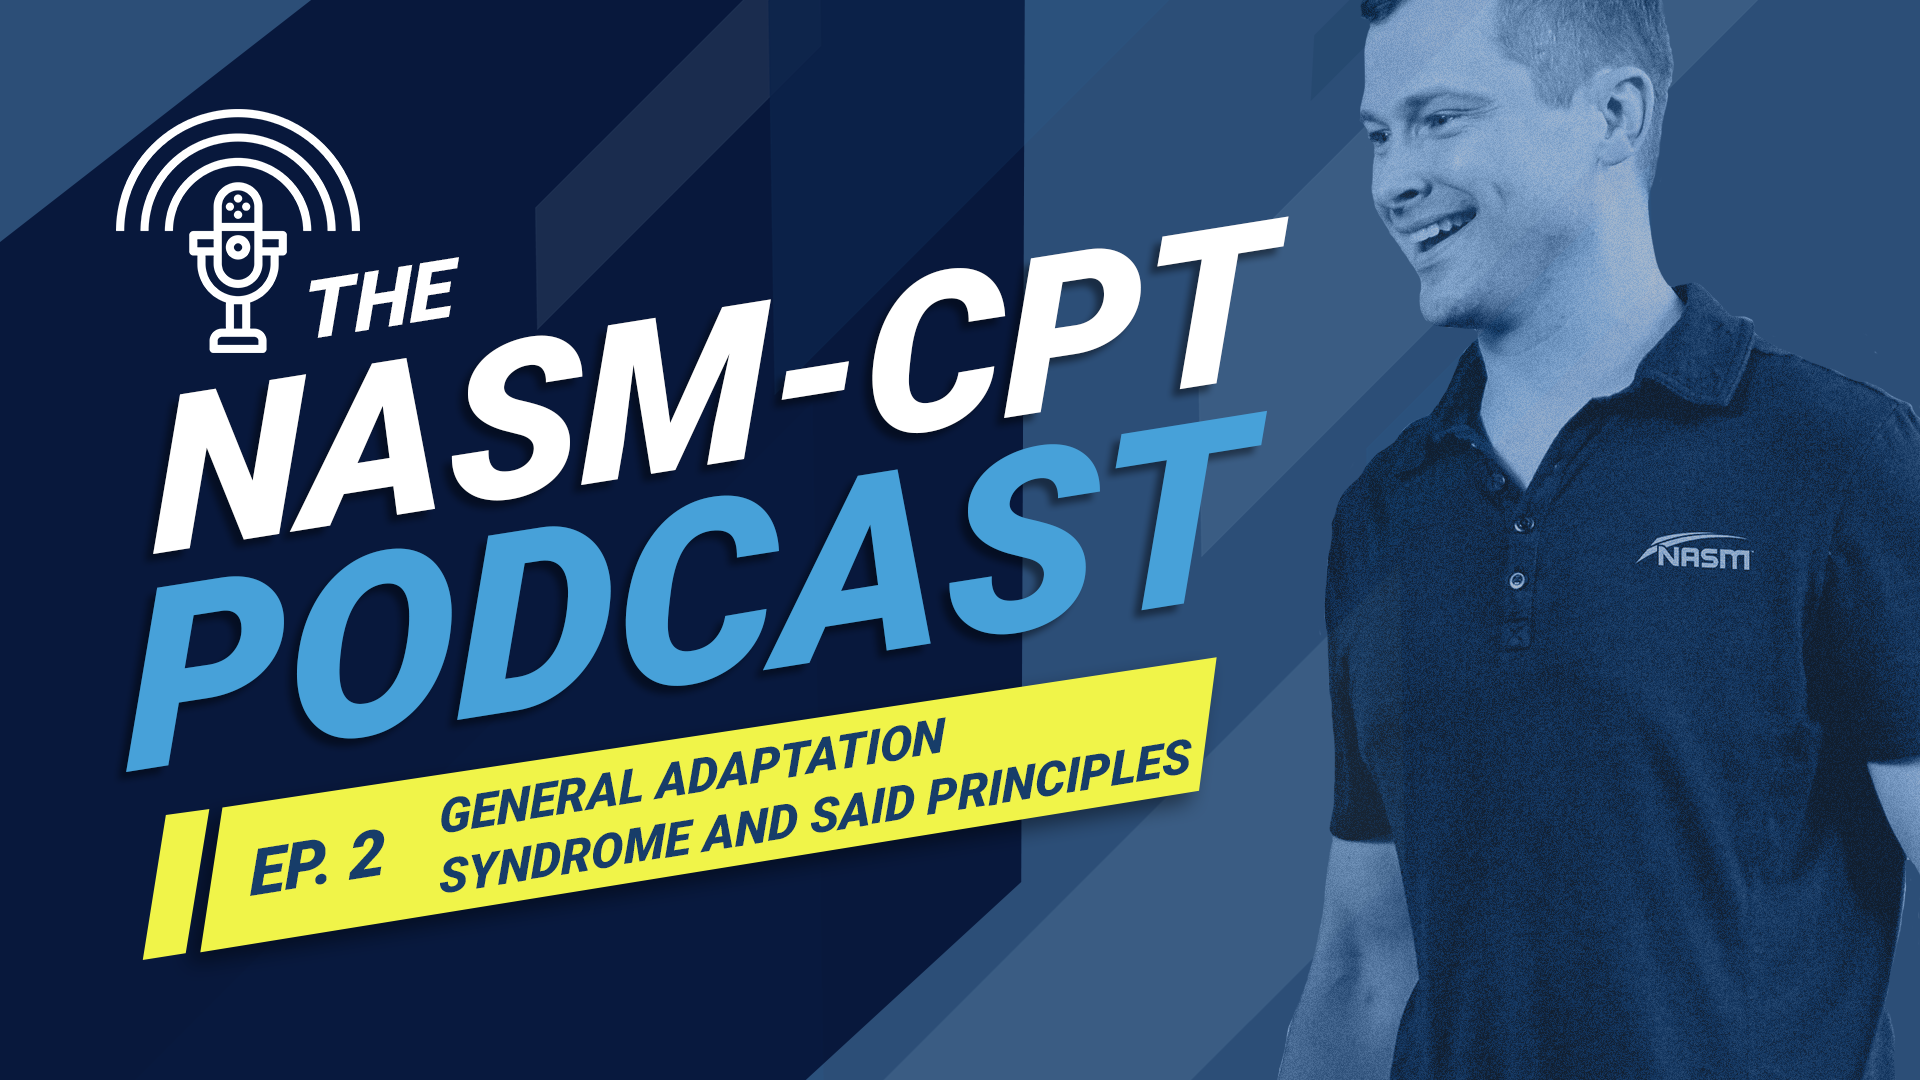 The Nasm Cpt Podcast General Adaptation Syndrome And Said